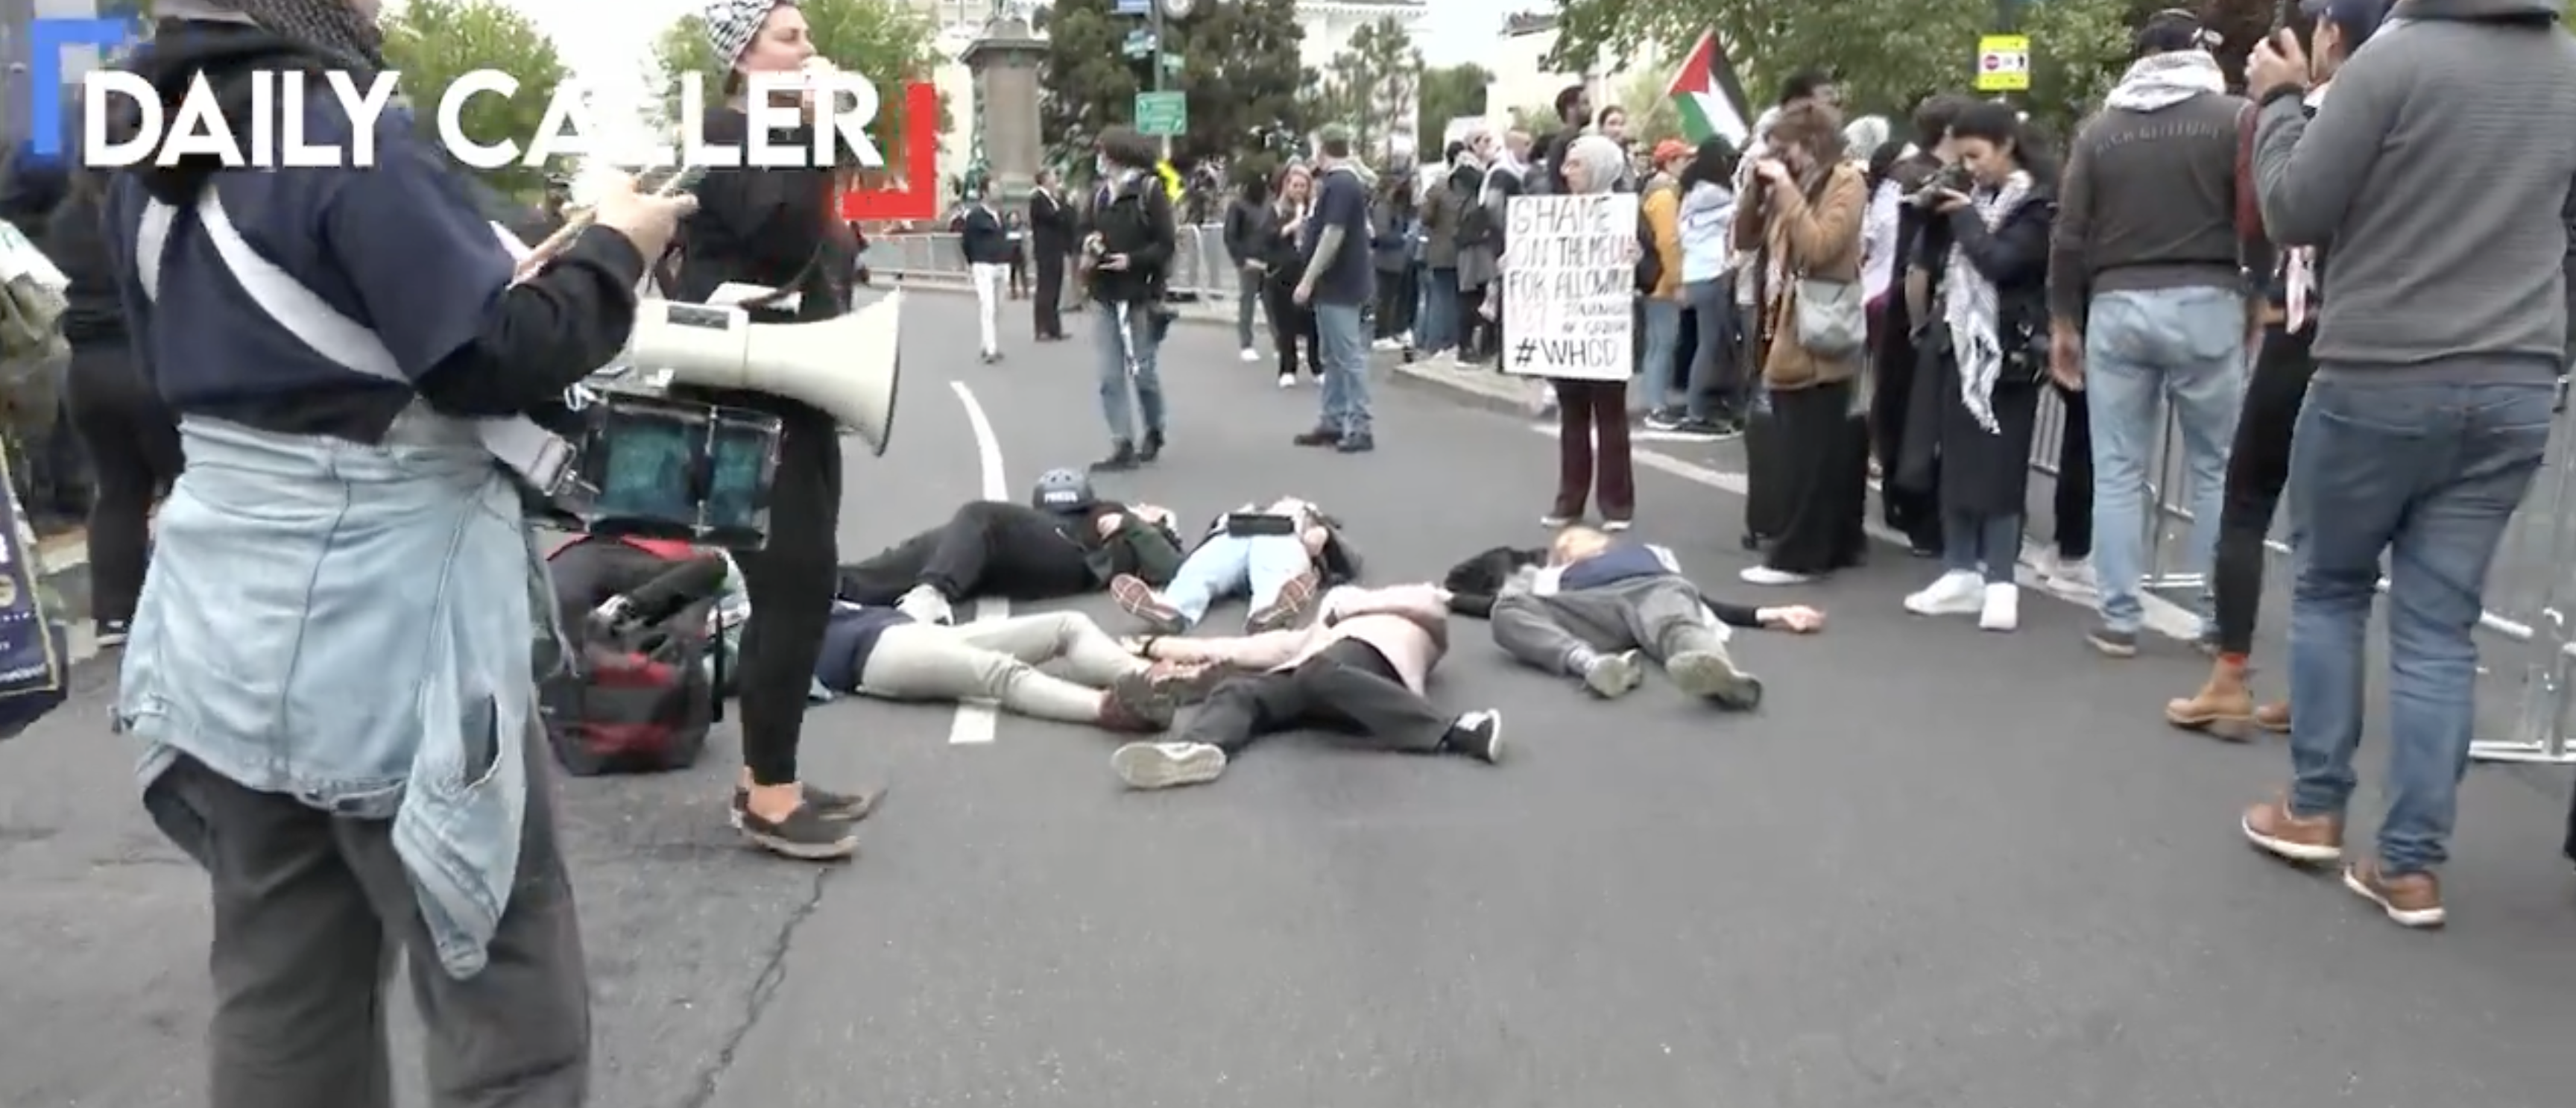 VIDEO: Anti-Israel Protesters Cause Chaos For White House Correspondents’ Dinner Attendees